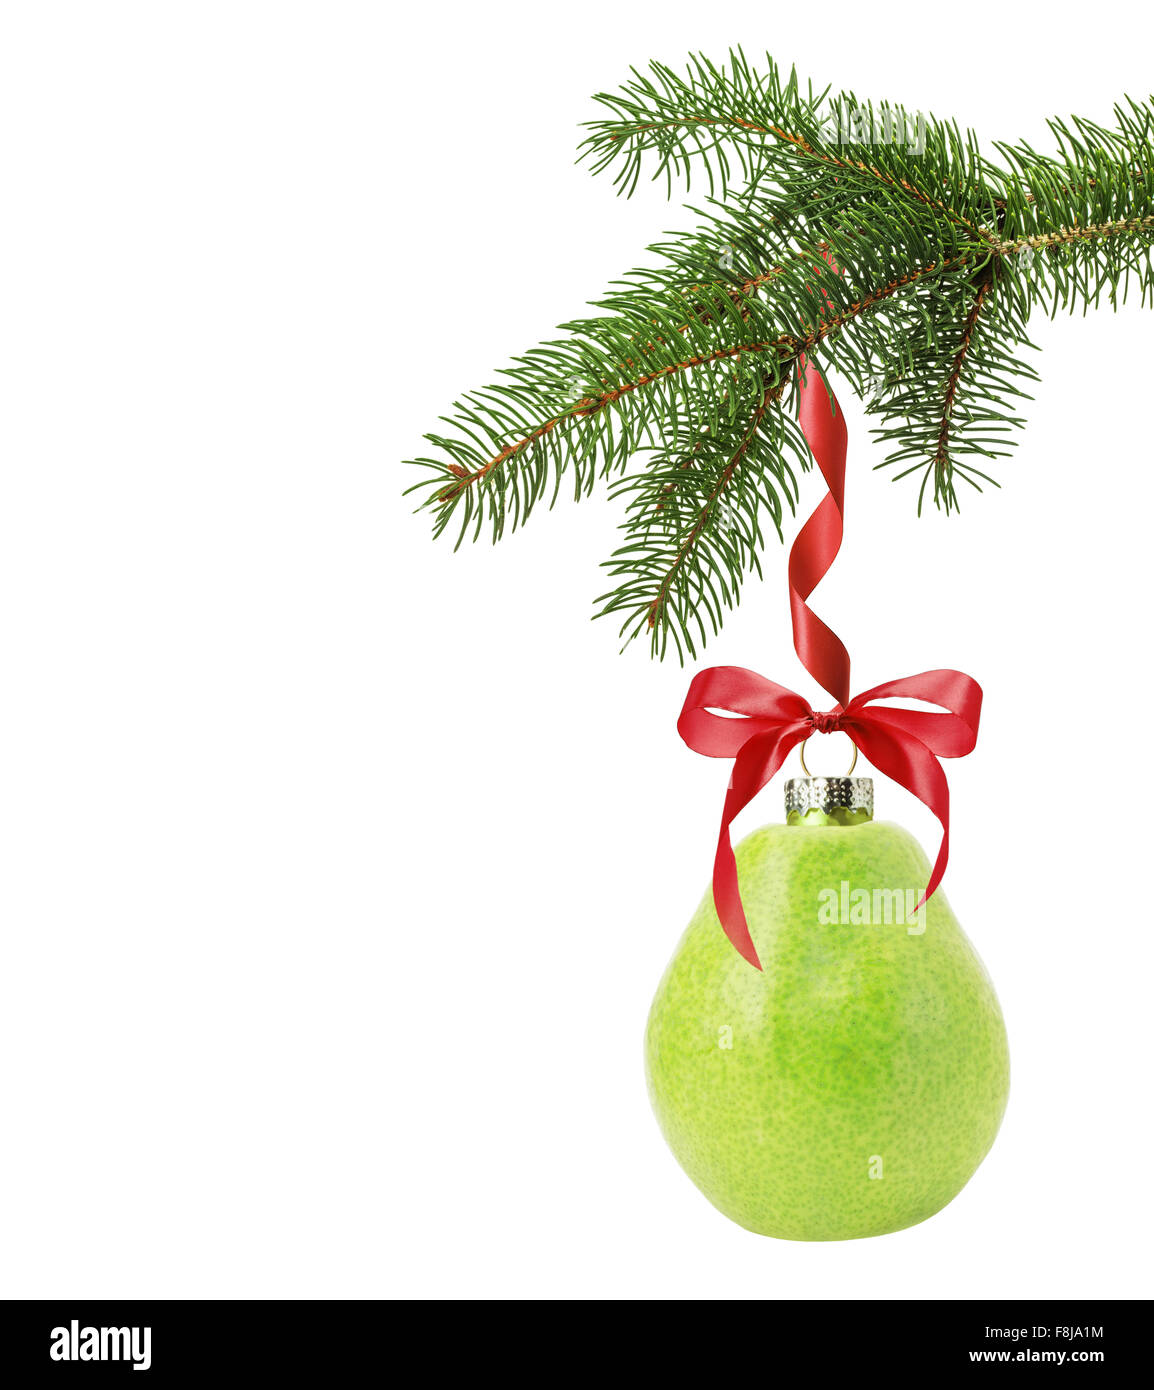 Christmas tree branch with Christmas ball in shape of pear isolated on the white background. Stock Photo